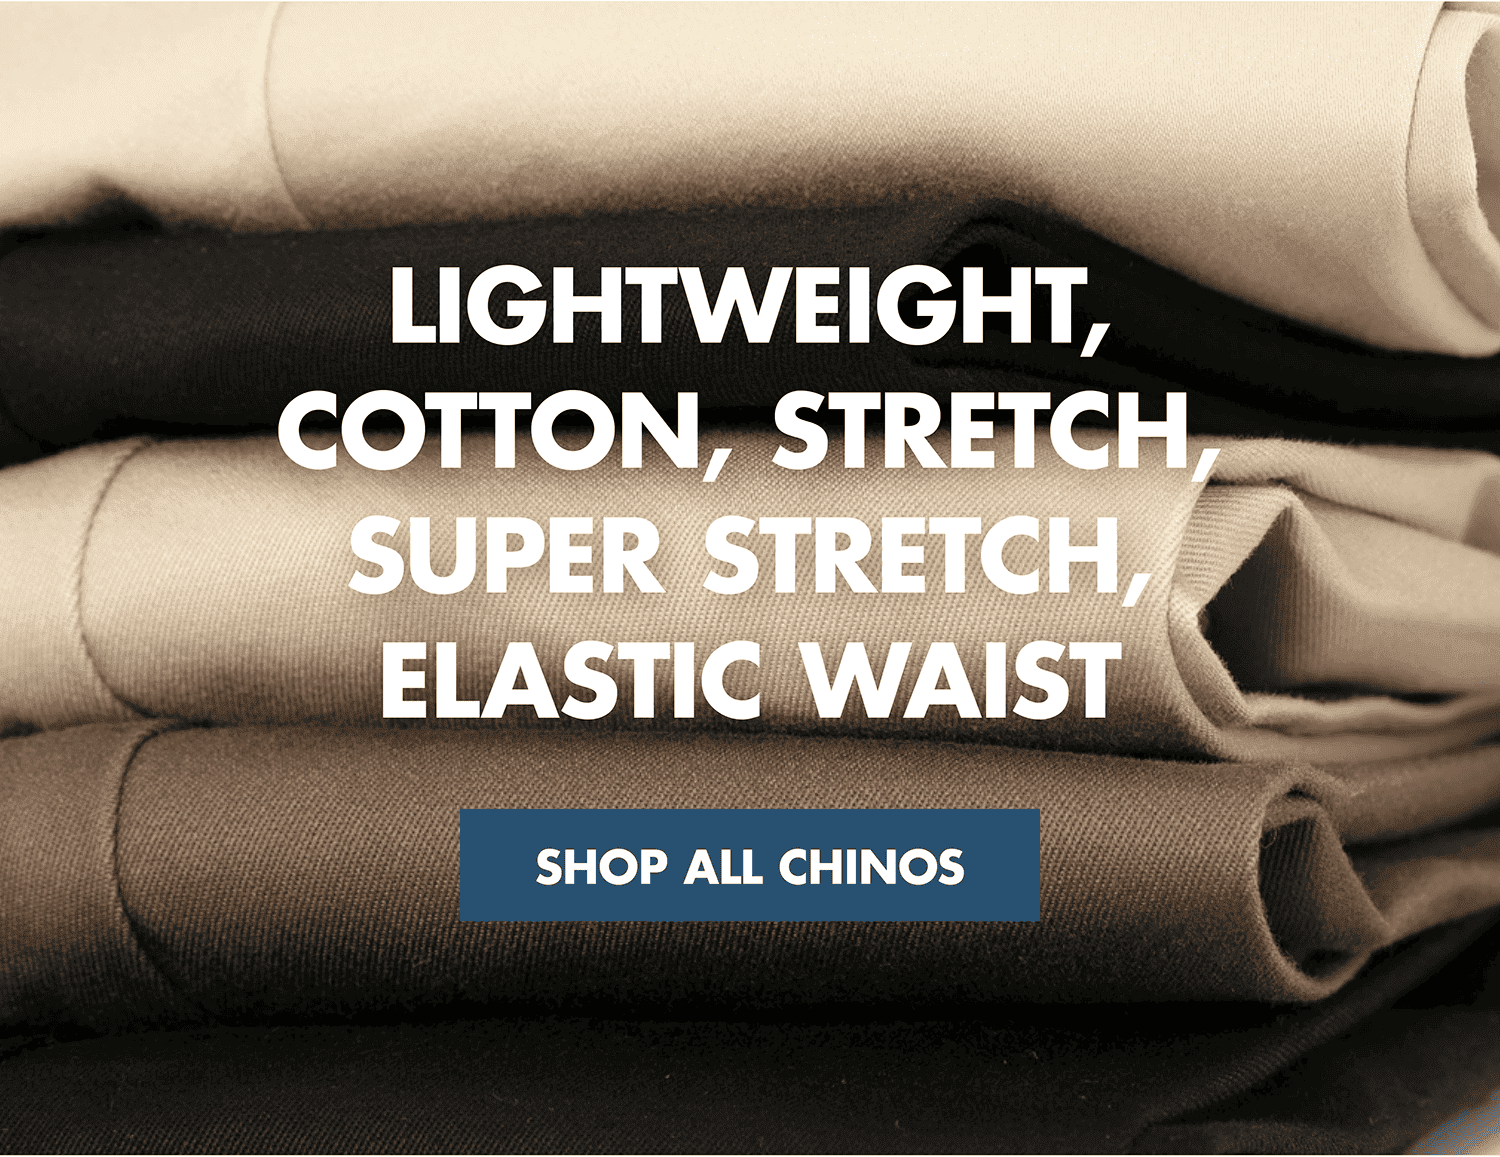 SHOP ALL CHINOS